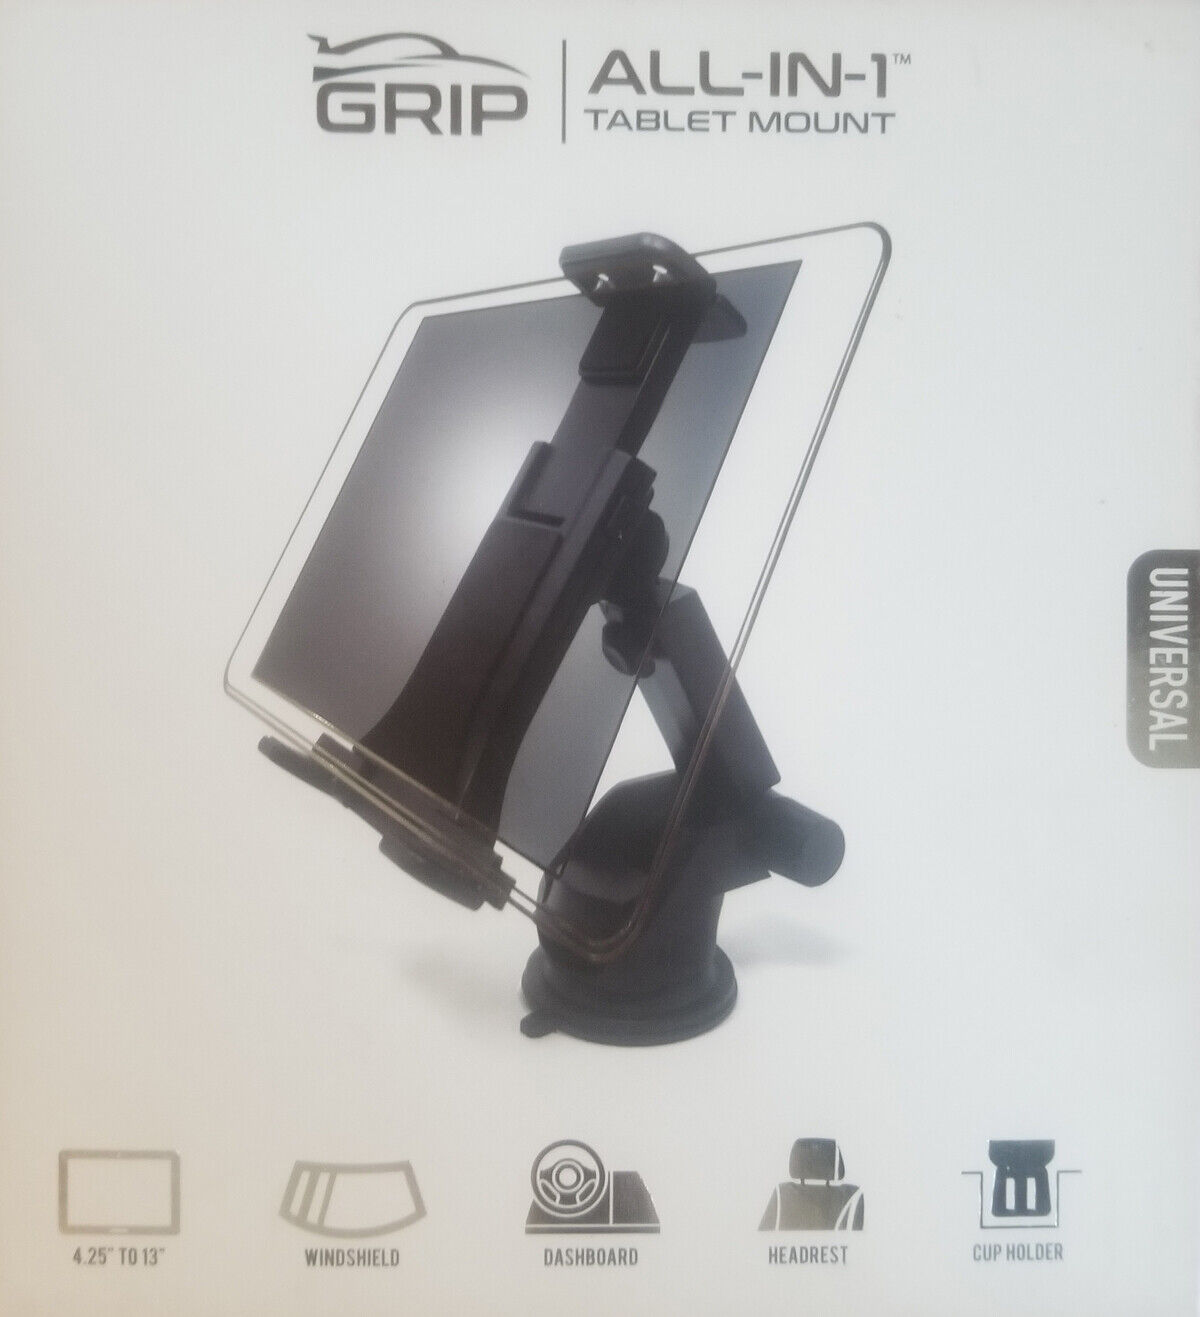 Verizon Grip All-in-1 Tablet Car Mount for tablets up to 13 inches (Universal)